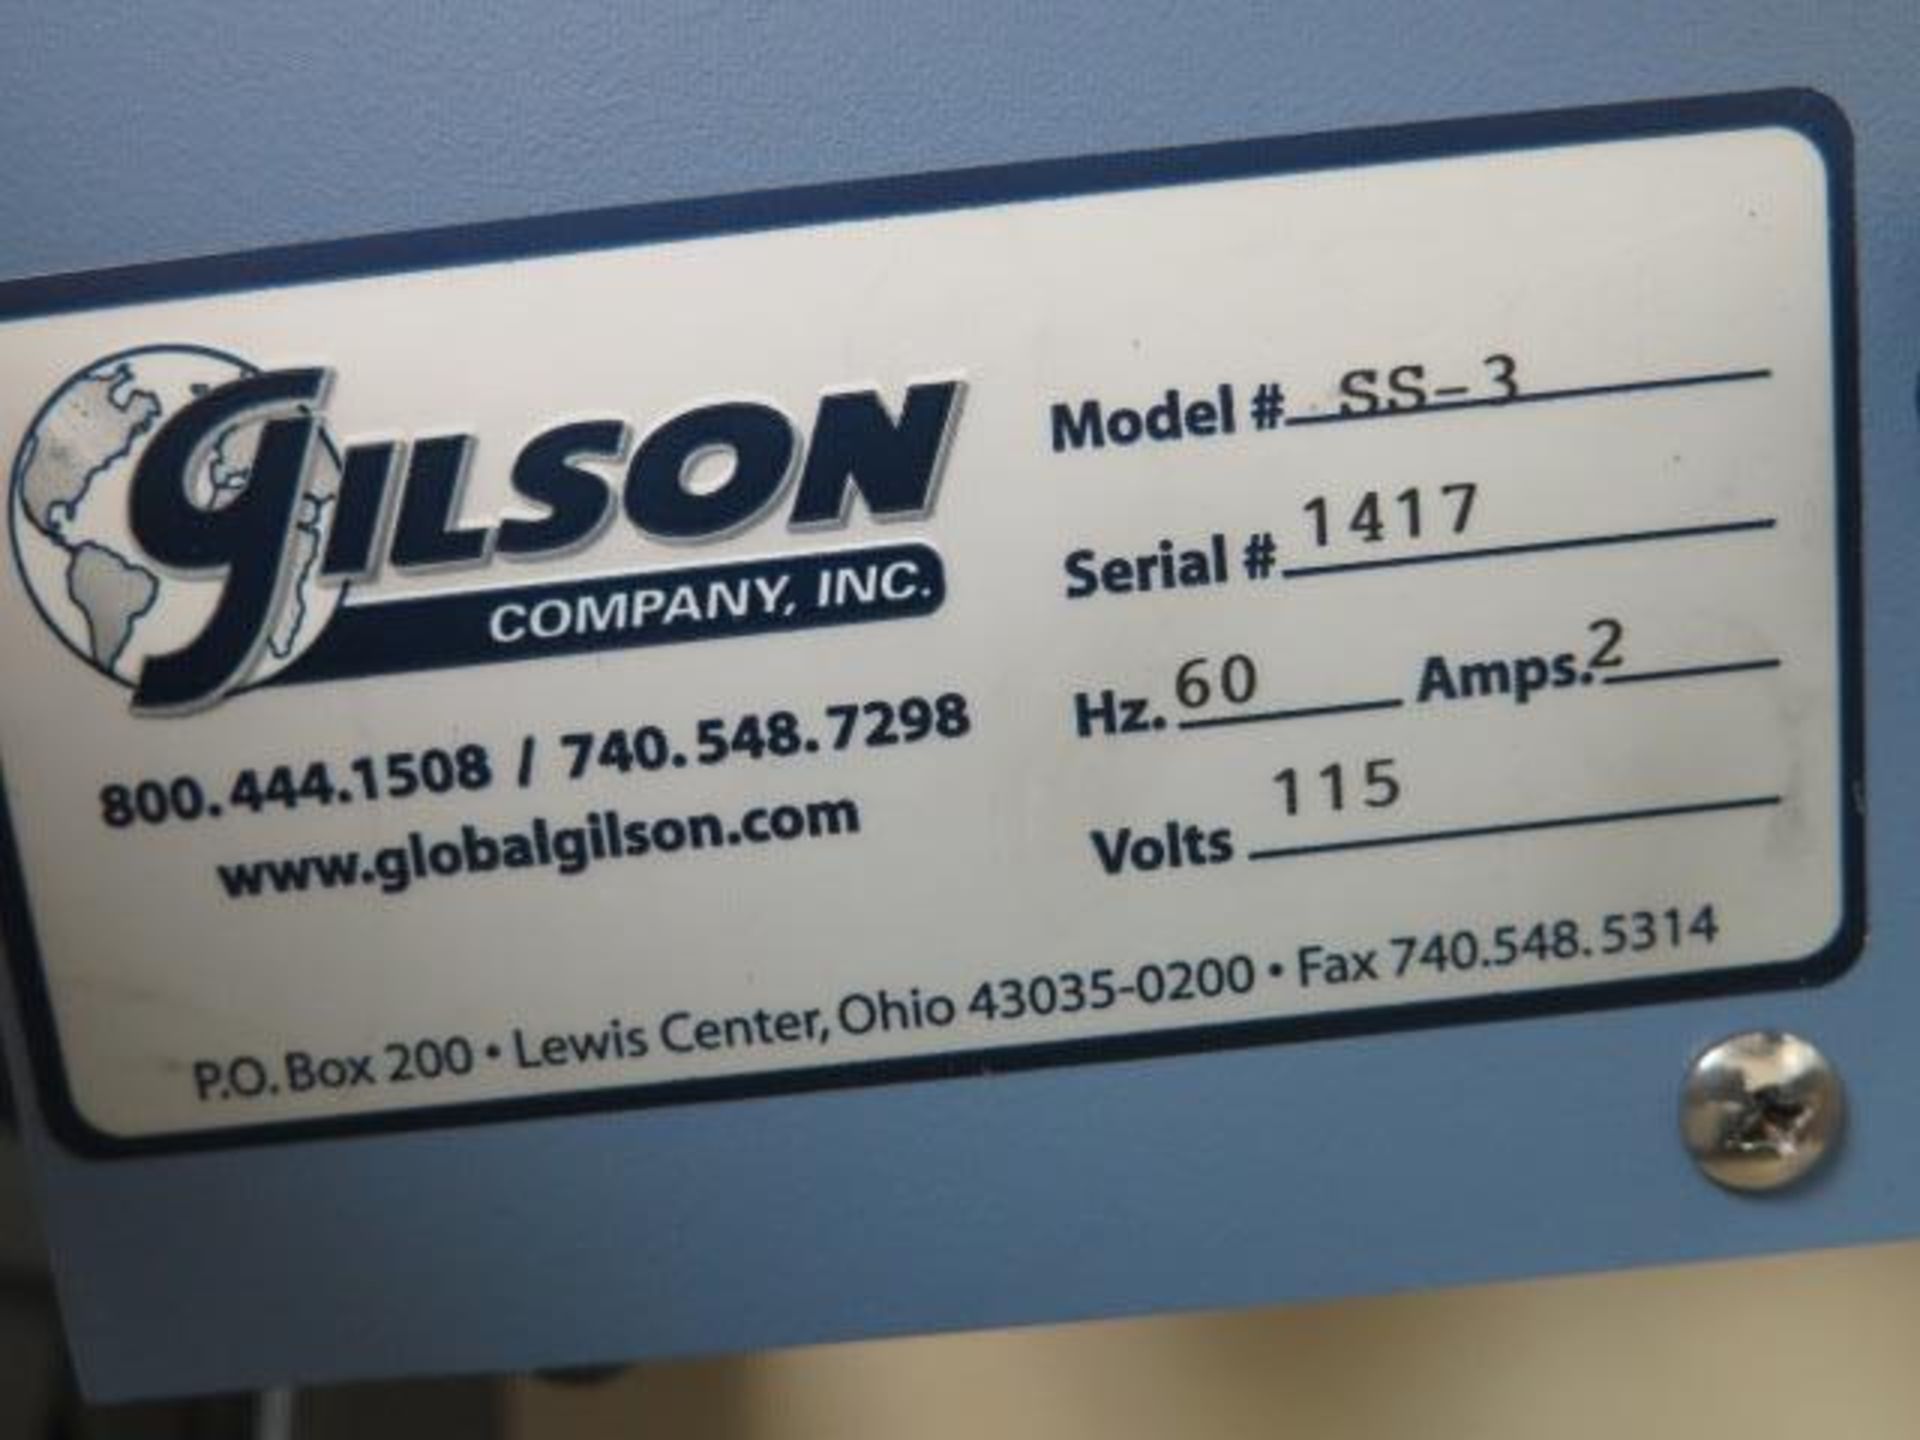 Gilson "Performer III SS-3" Sieve Shaker w/ Screens, SOLD AS IS AND WITH NO WARRANTY - Image 5 of 5